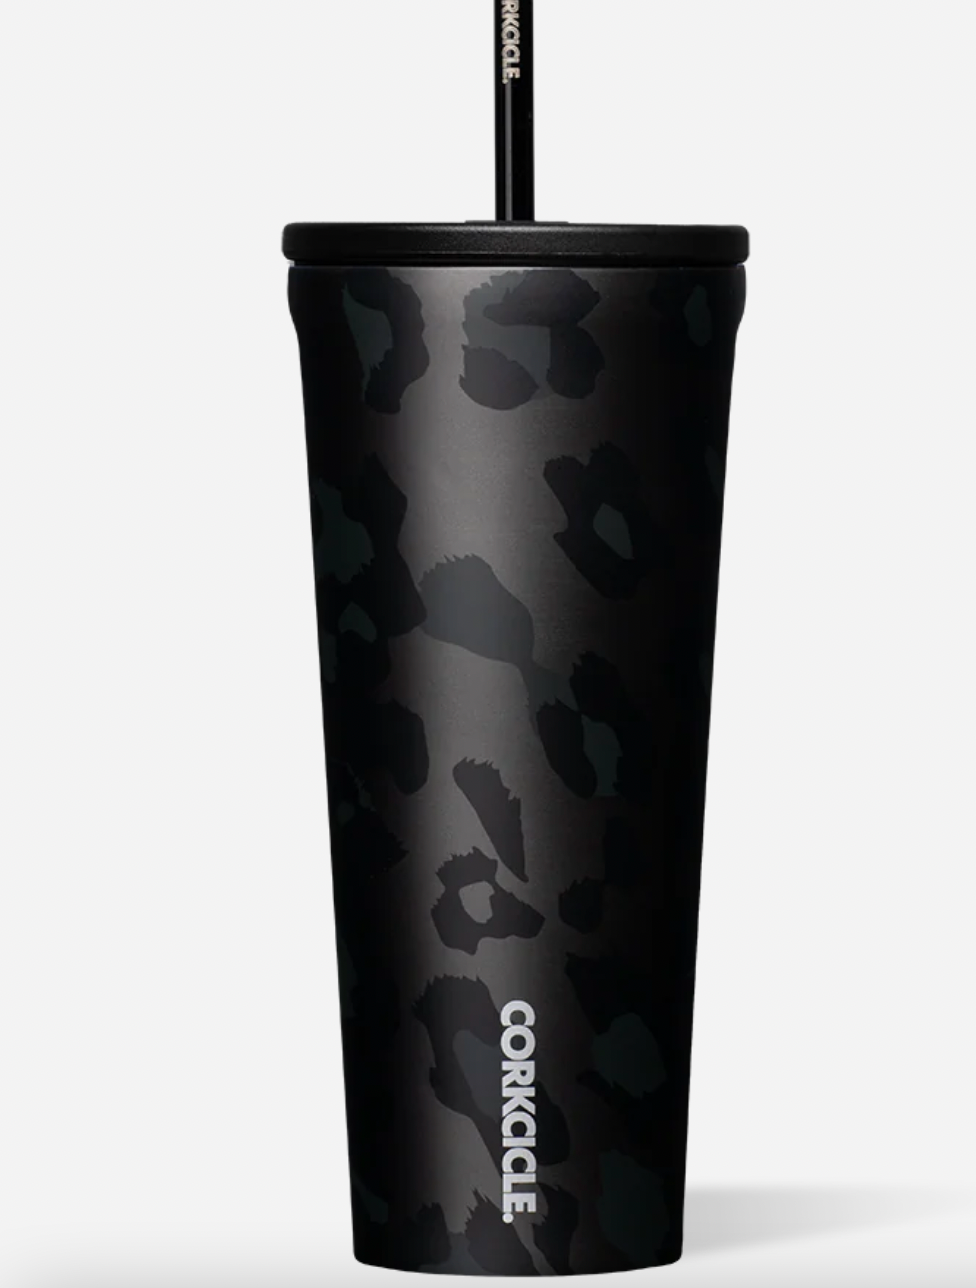 Corkcicle Classic 24oz. Cold Cup